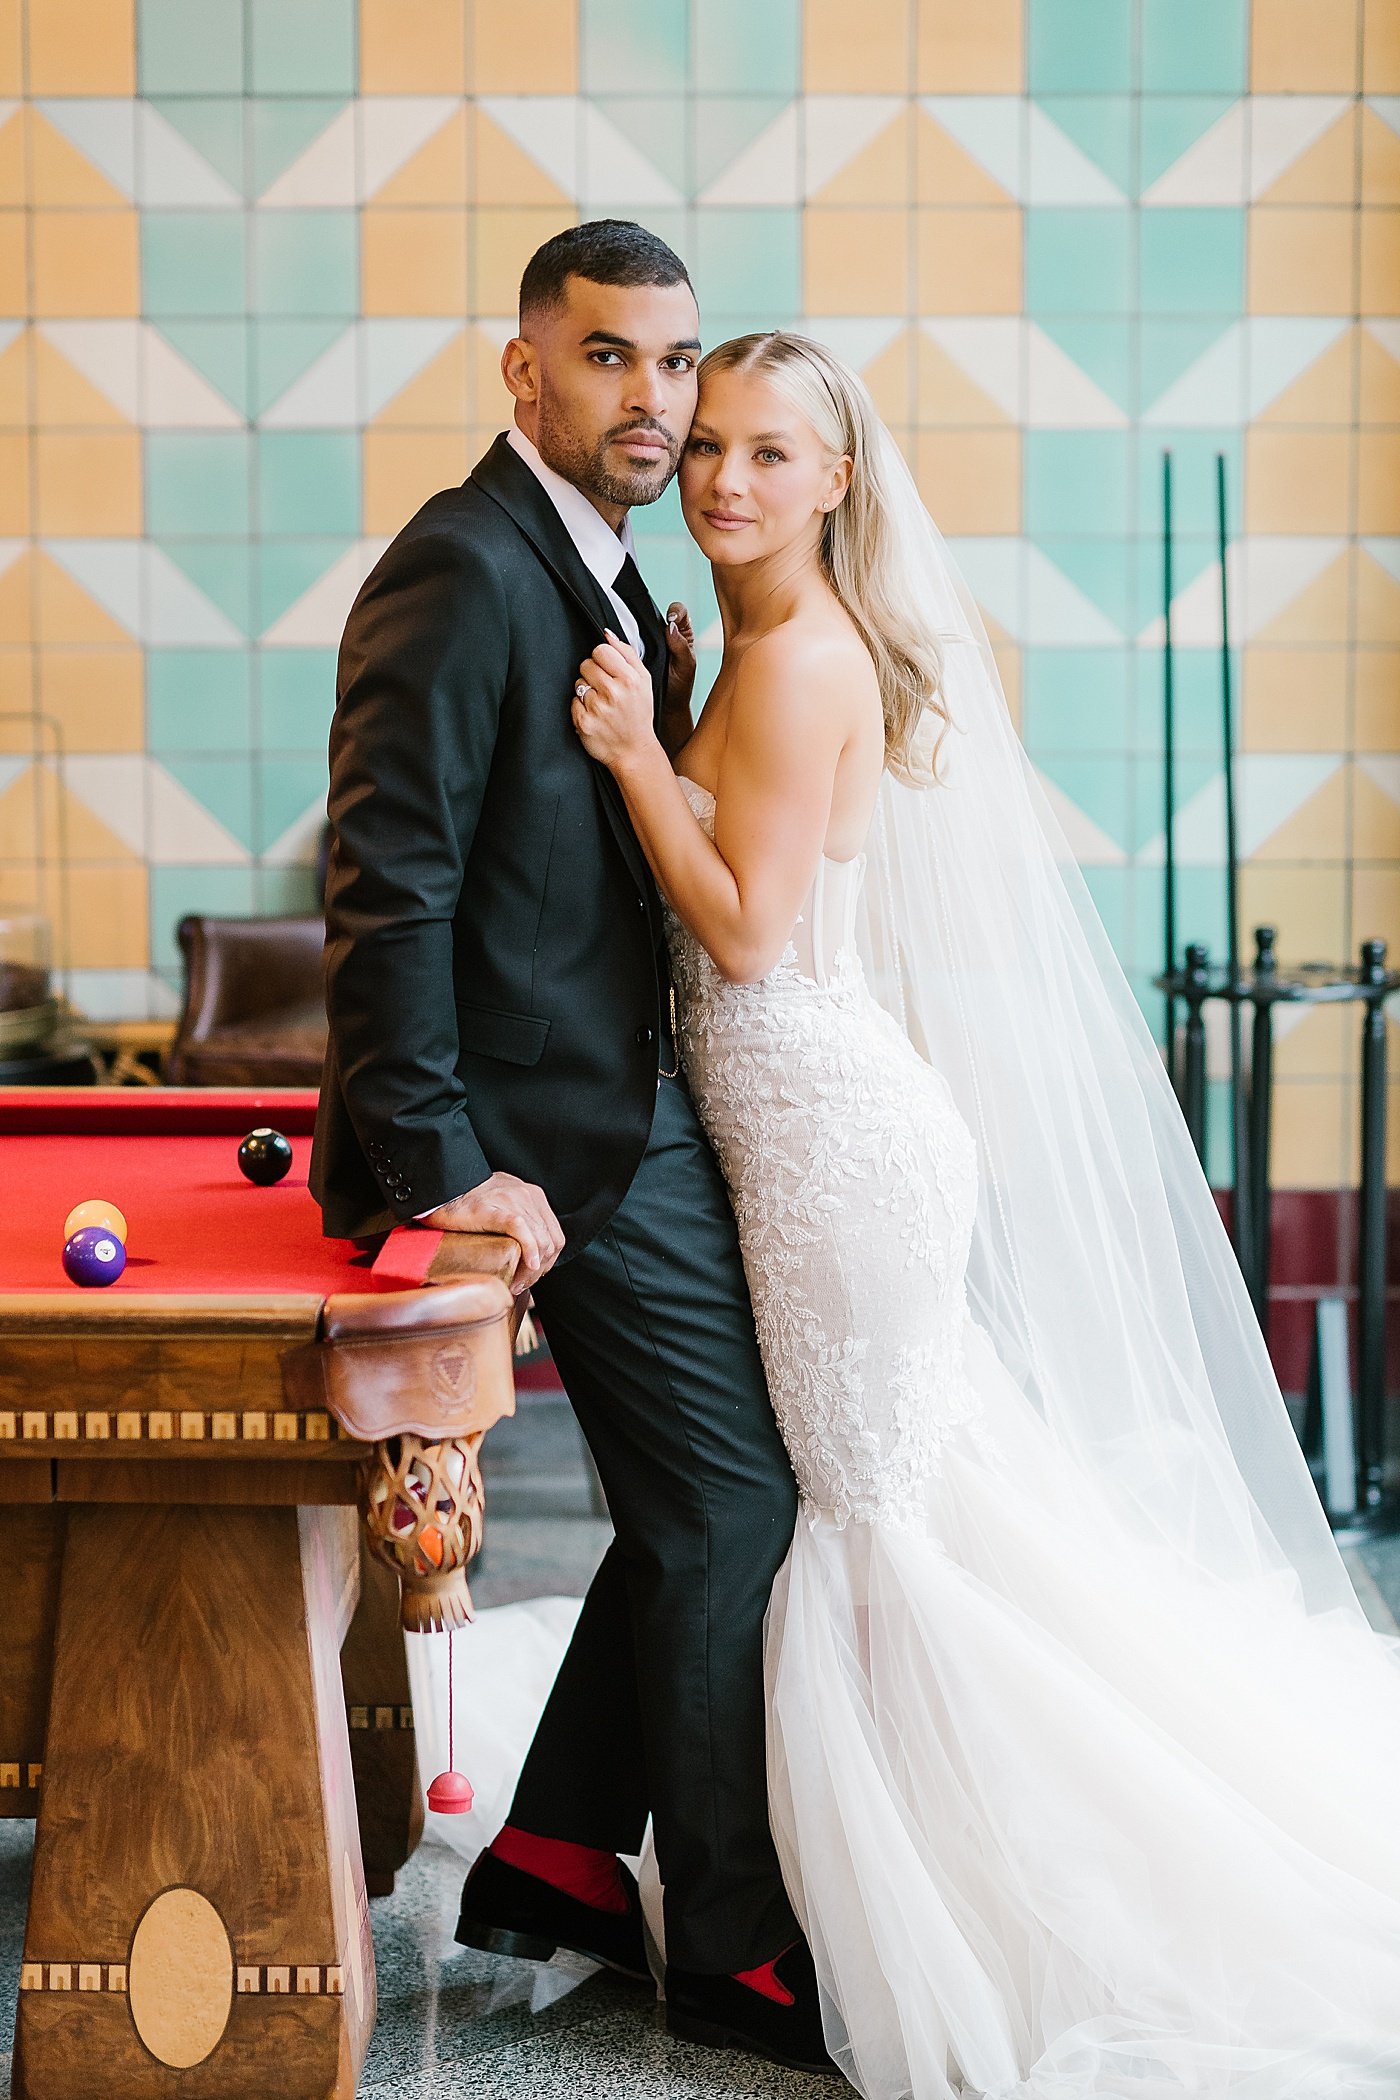 Katie and Micah's Bottleworks Indianapolis Wedding Rebecca Shehorn Photography54.jpg